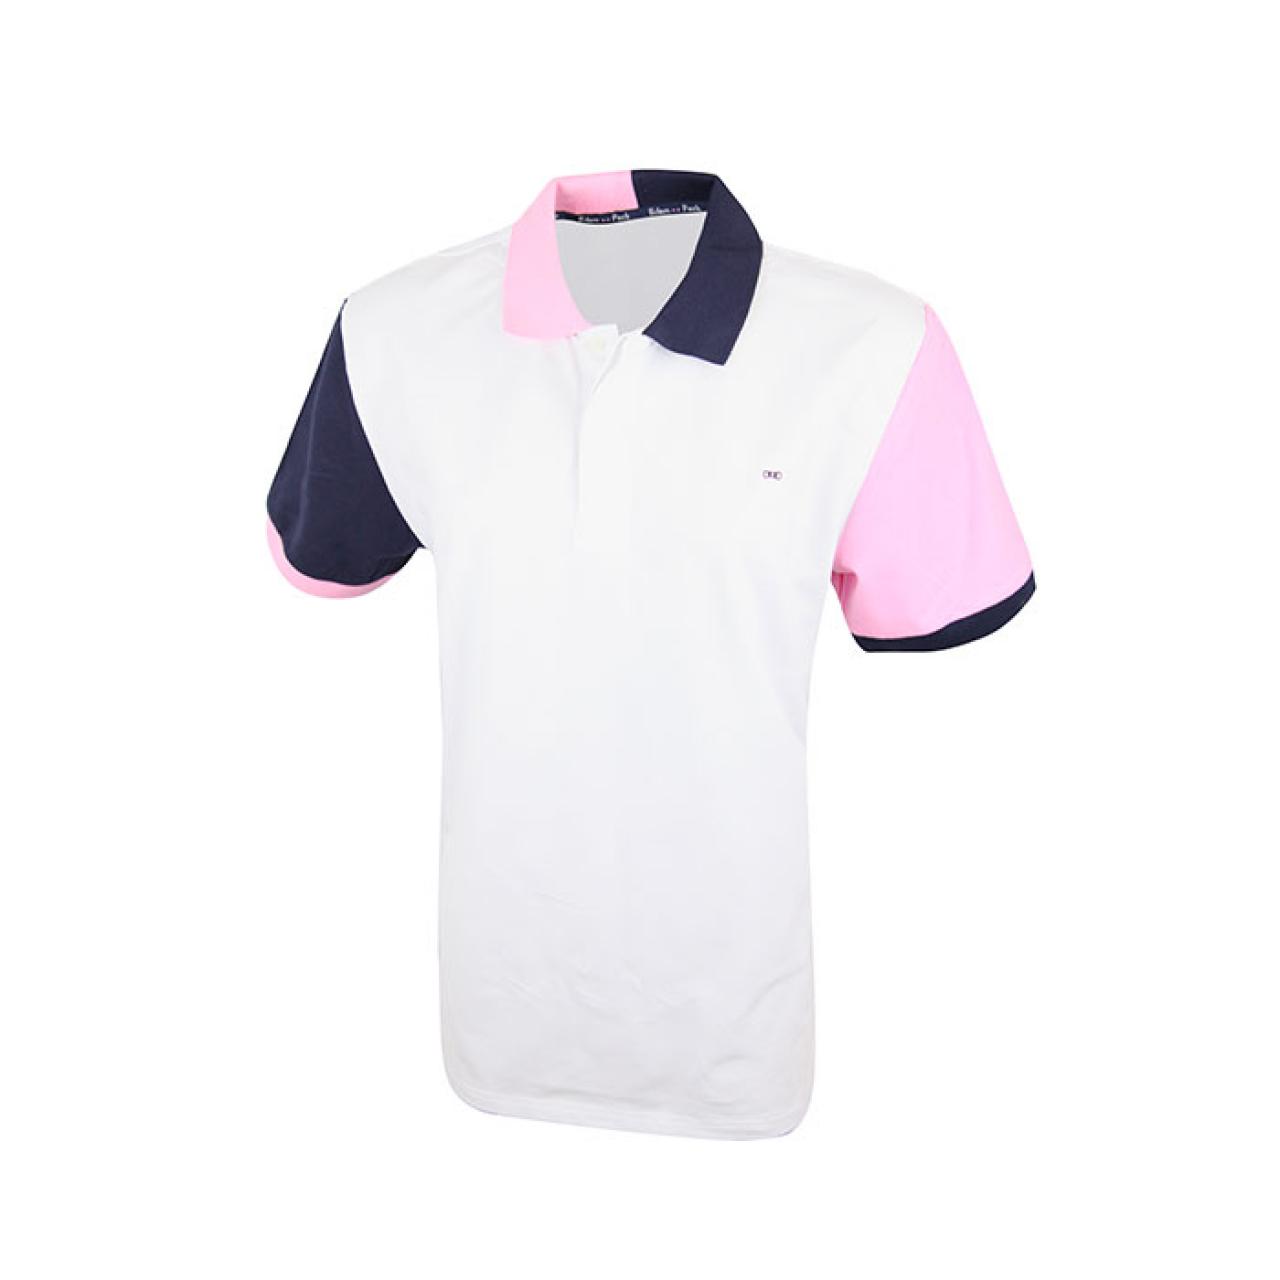 Men's Multi-Color Short Sleeves And Collared Fit Pink White Polo Shirt